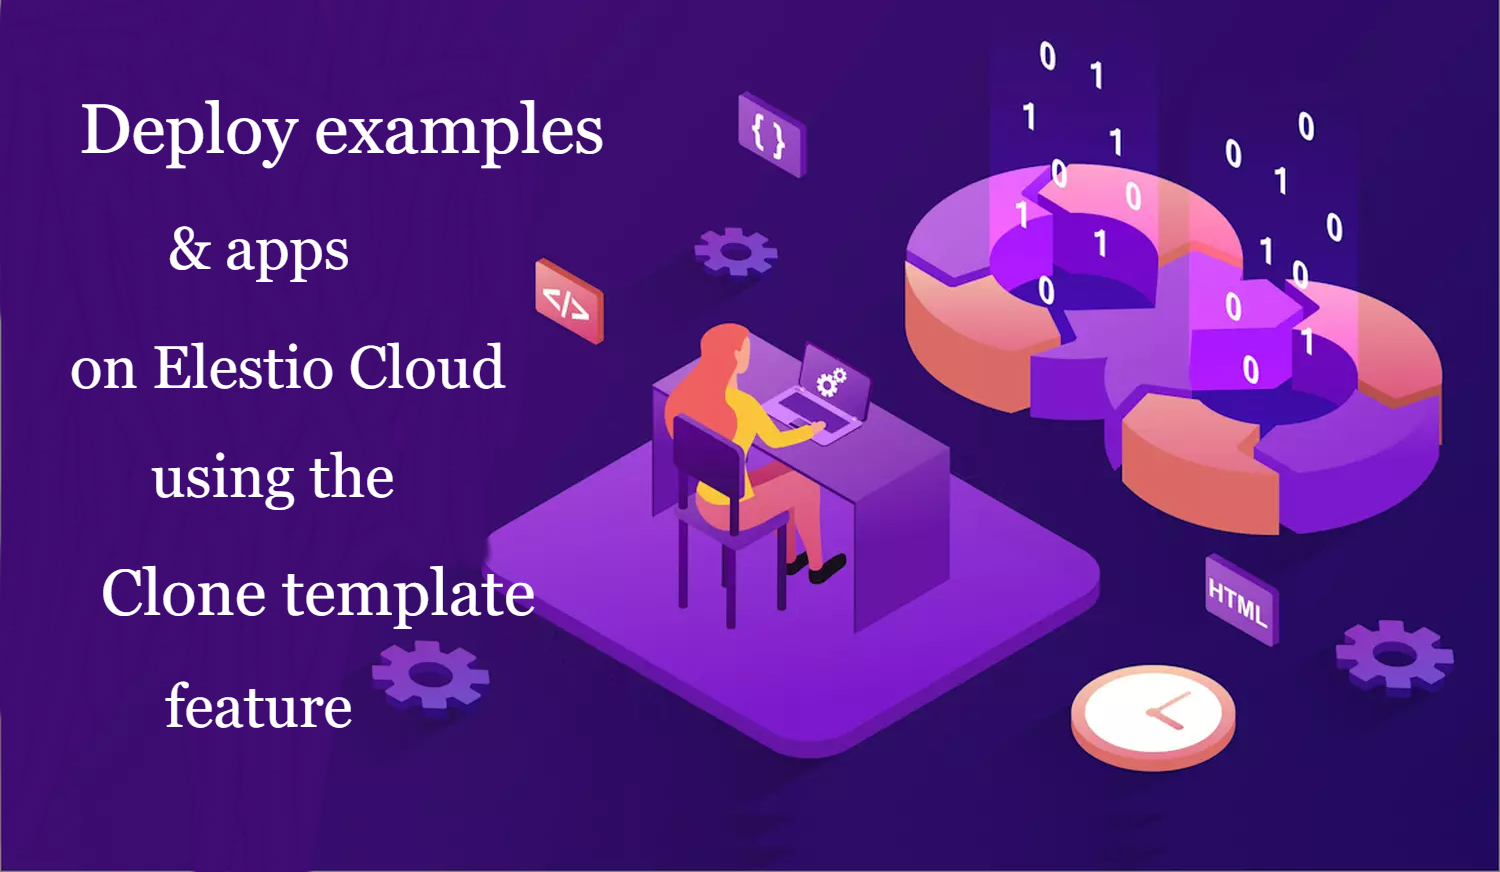 Deploy examples & apps on Elestio using the "clone template" feature